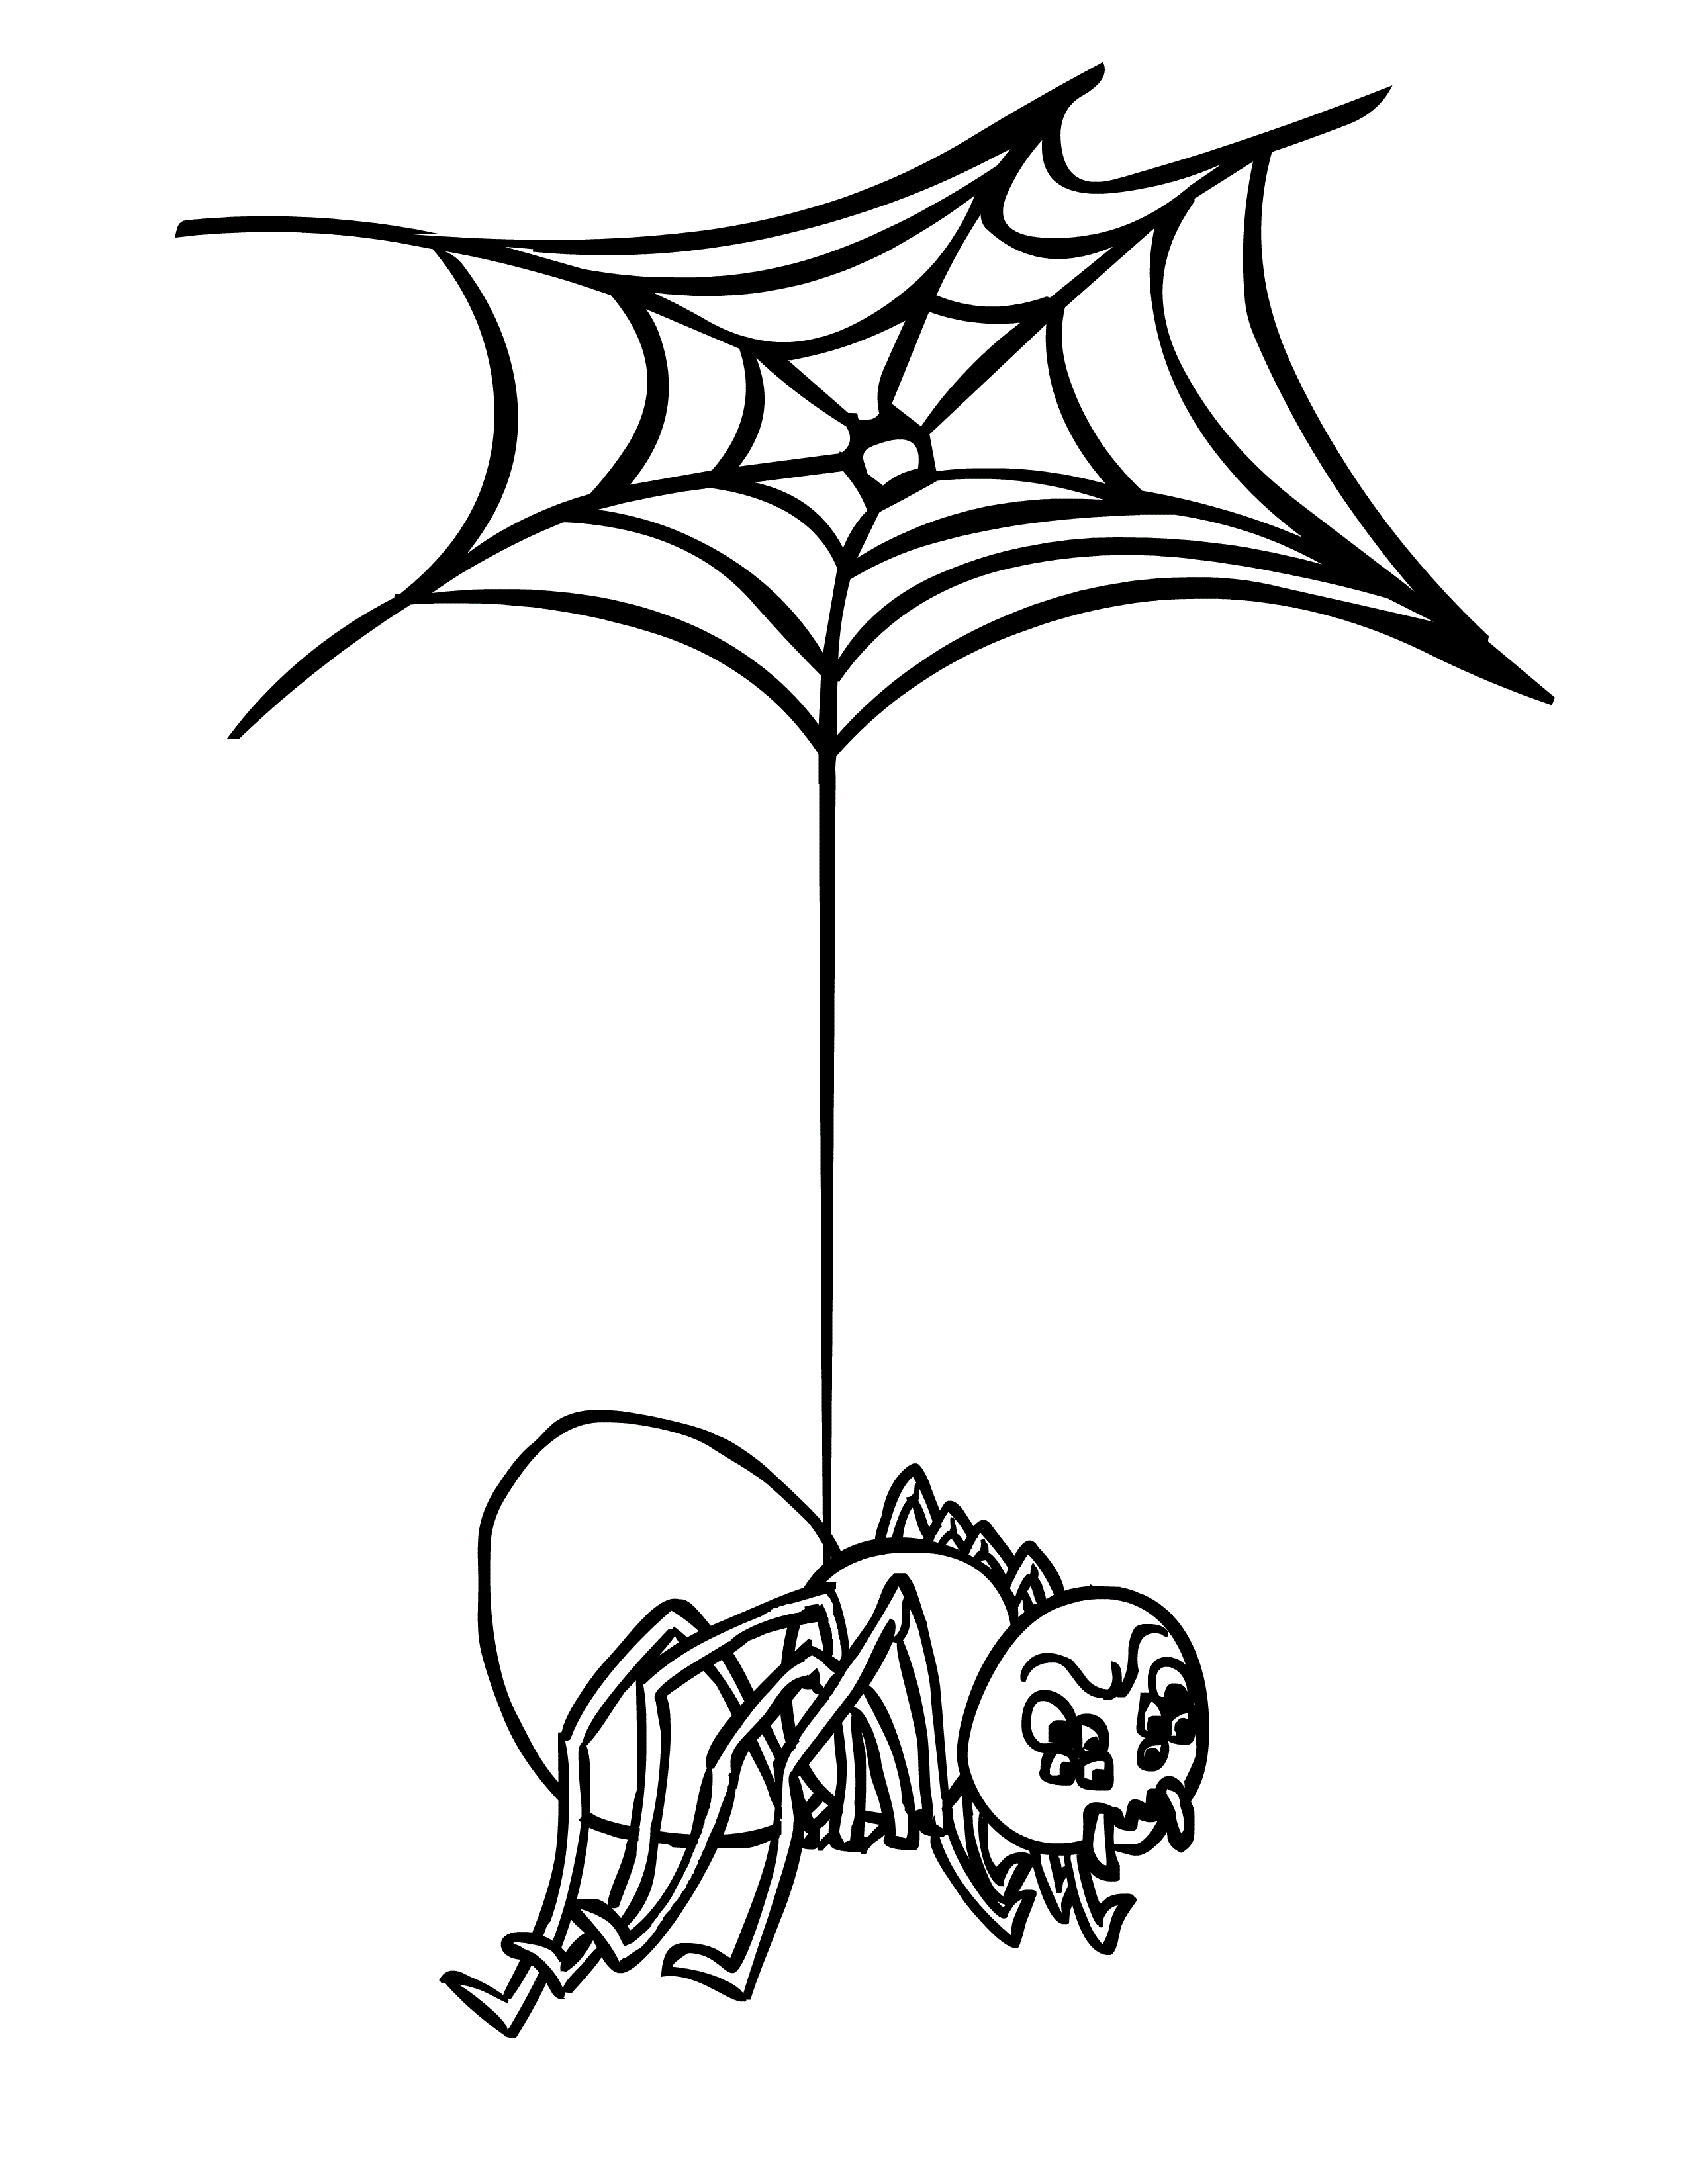 spider web coloring page free printable spider web coloring pages for kids page coloring spider web 